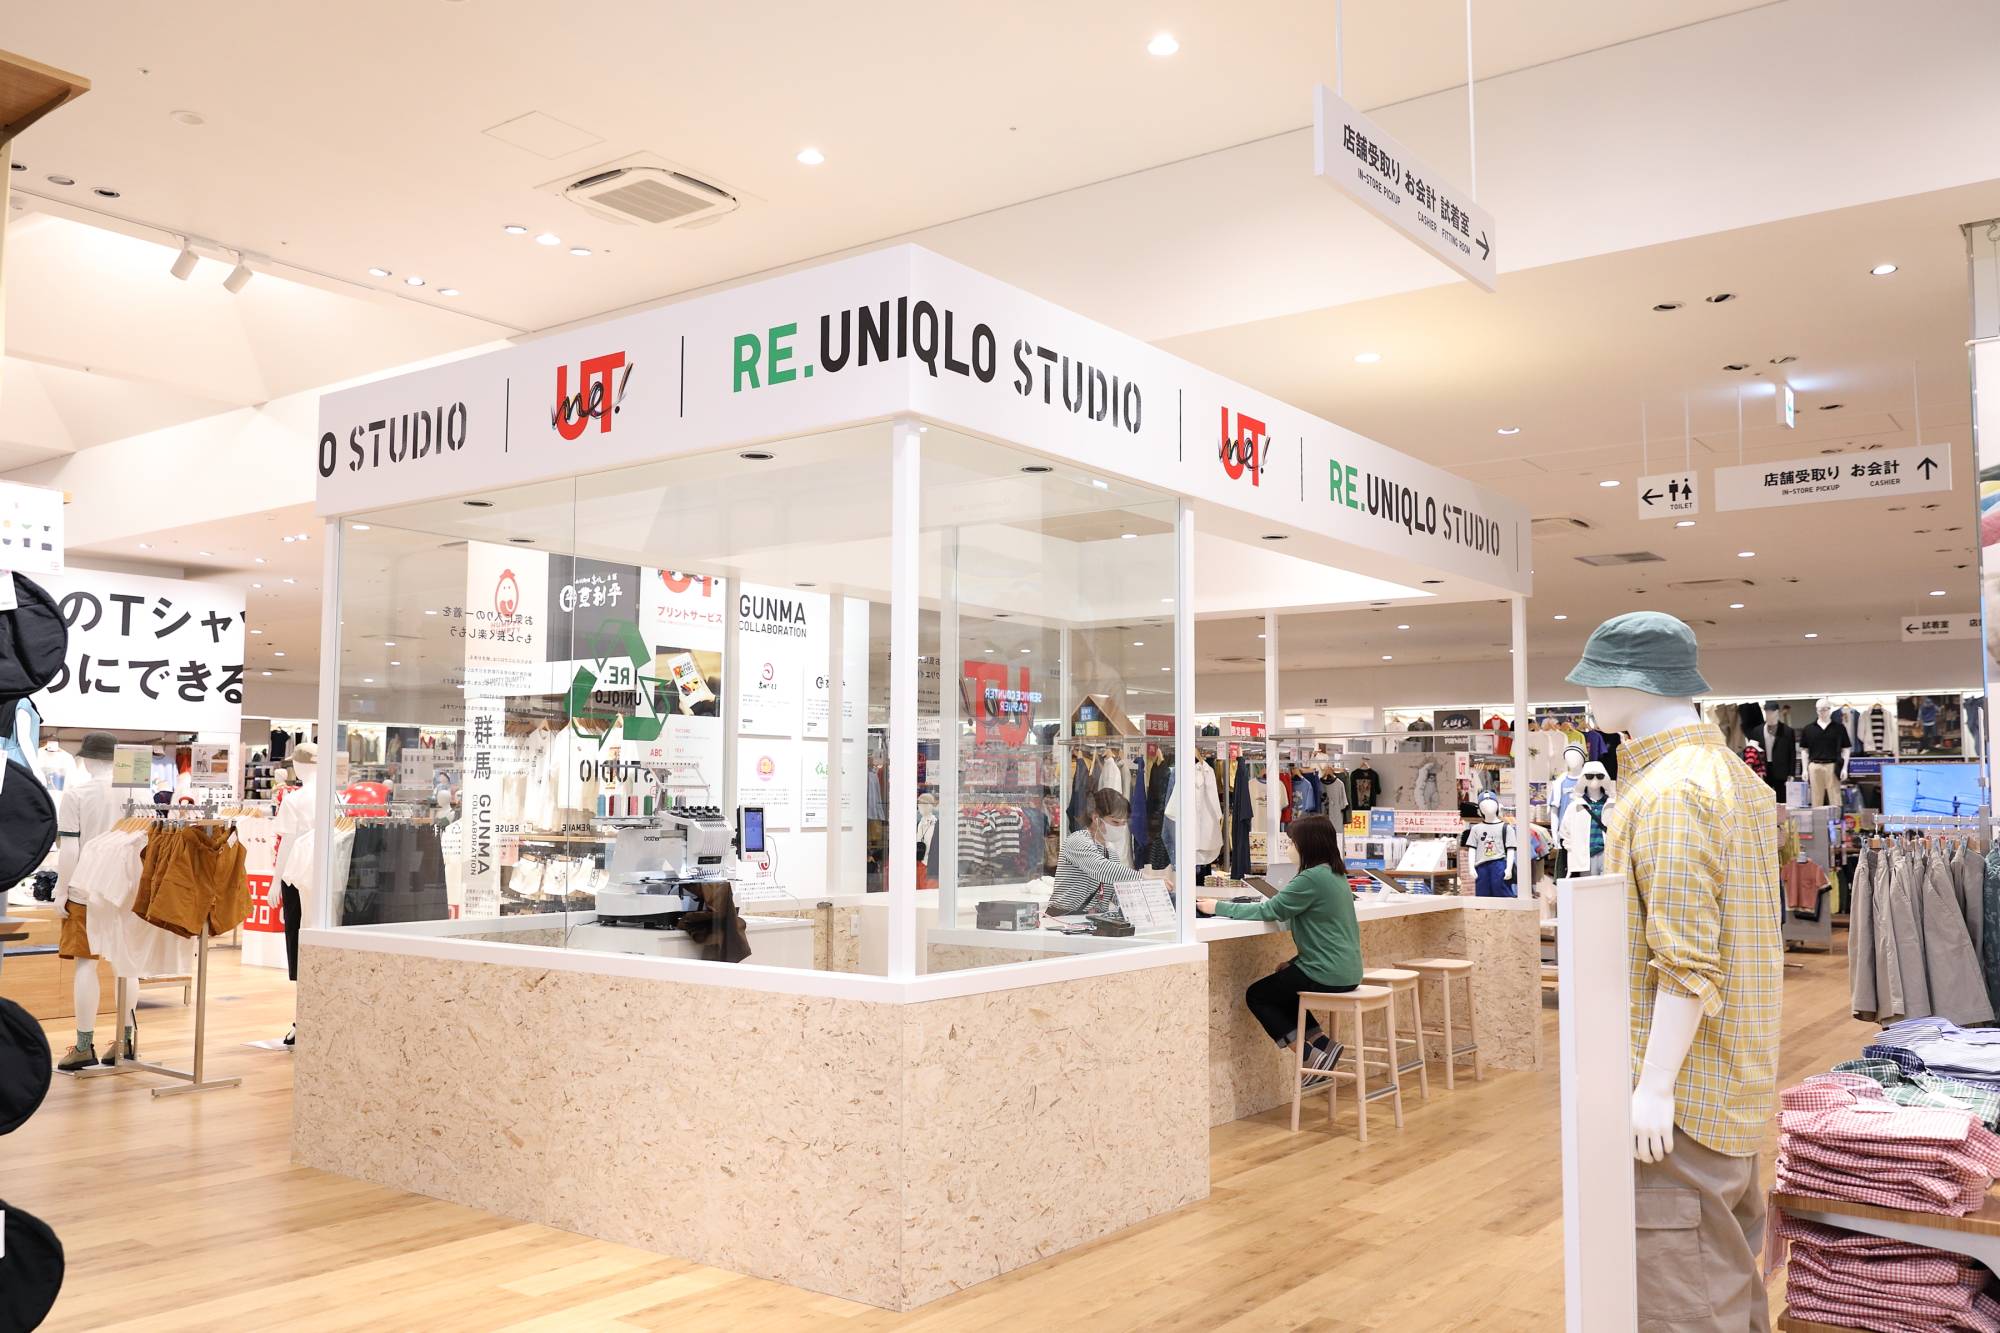 With eye on growth and sustainability targets, Uniqlo rethinks retail  spaces - The Japan Times